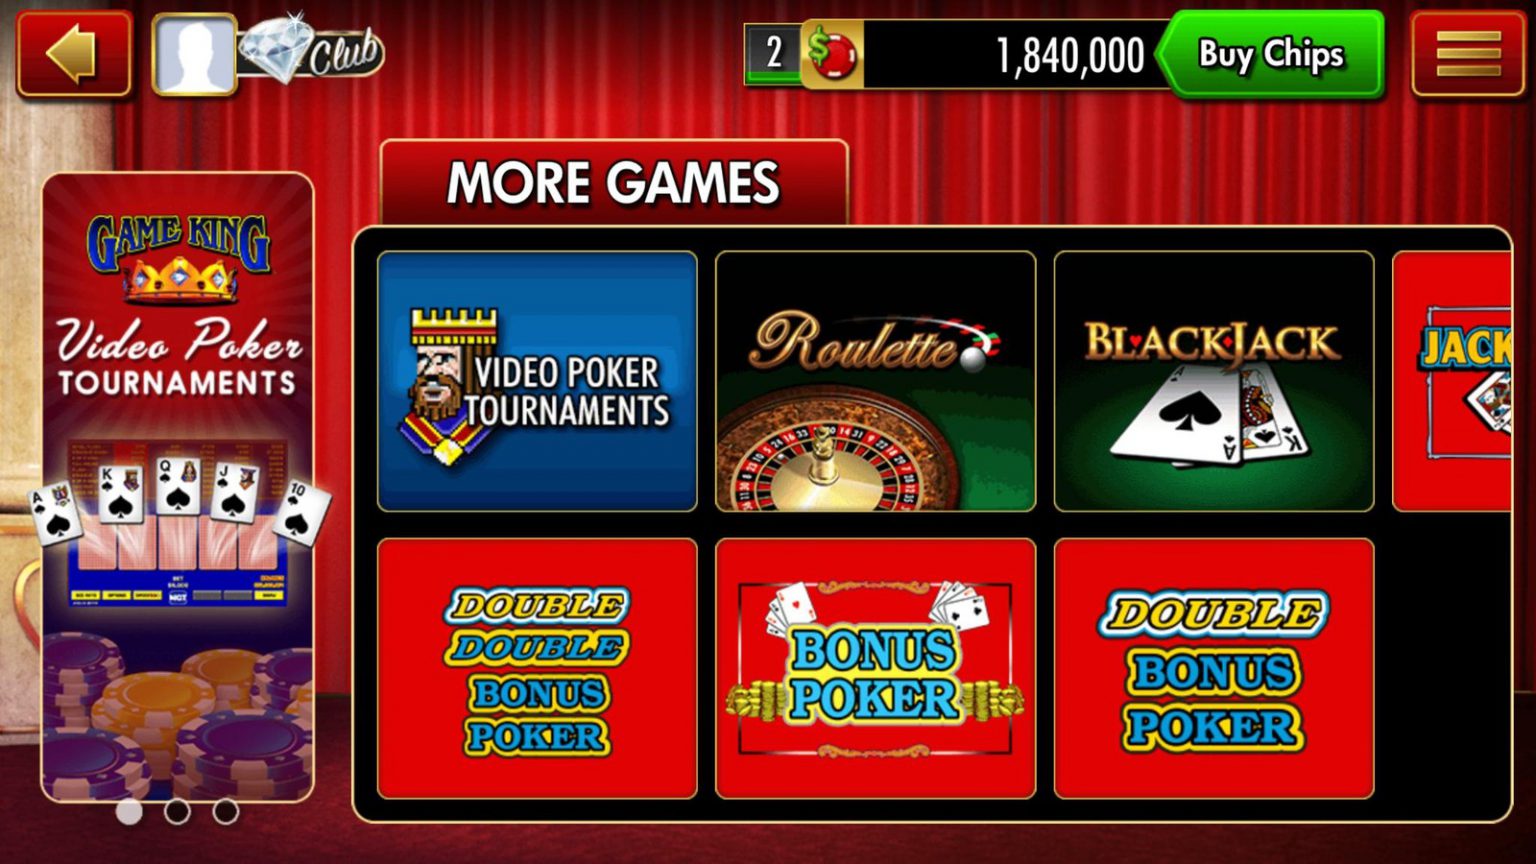 free chips codes double down casino